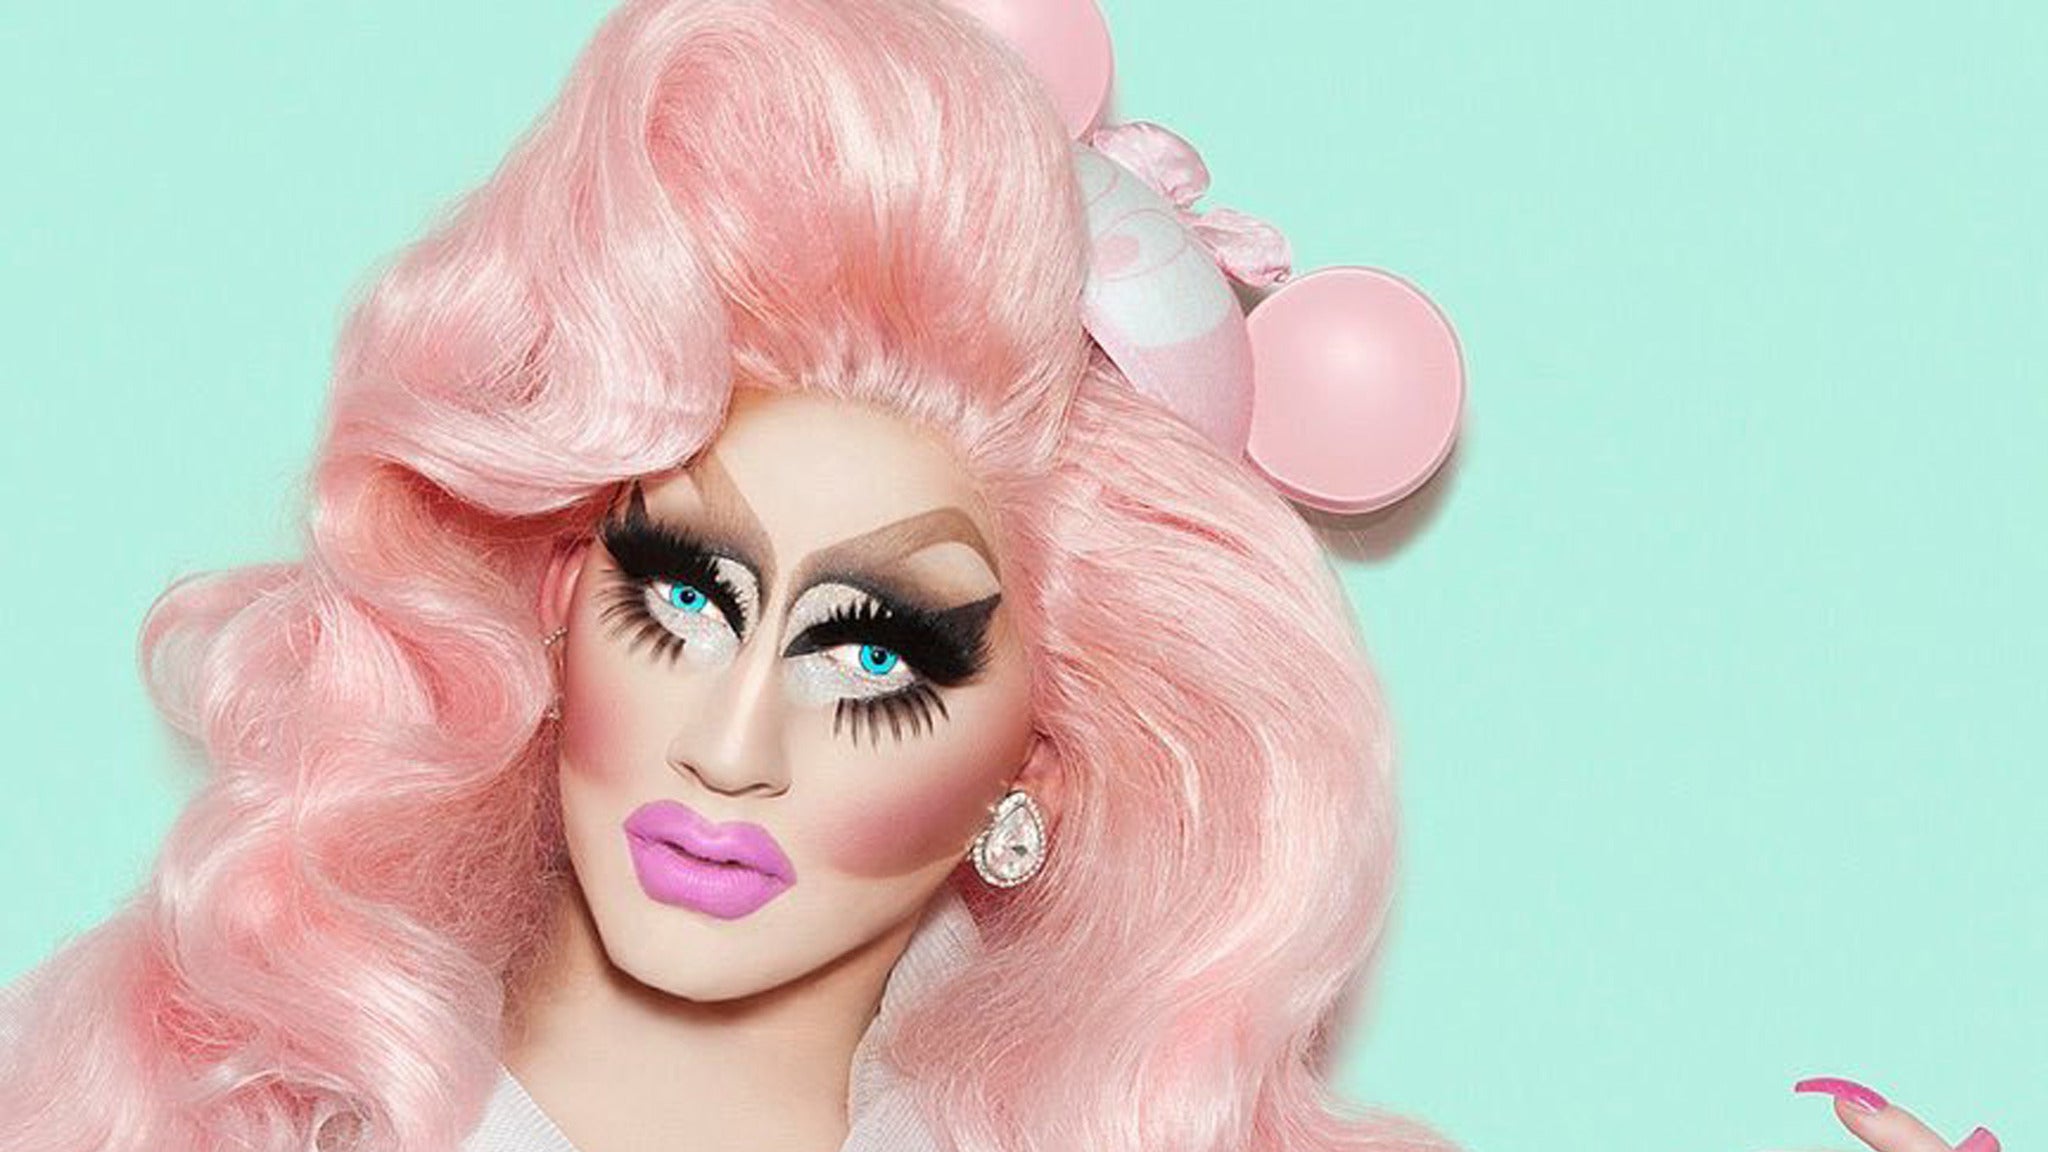 Trixie Mattel: Grown Up in Ft Lauderdale promo photo for Official Platinum presale offer code